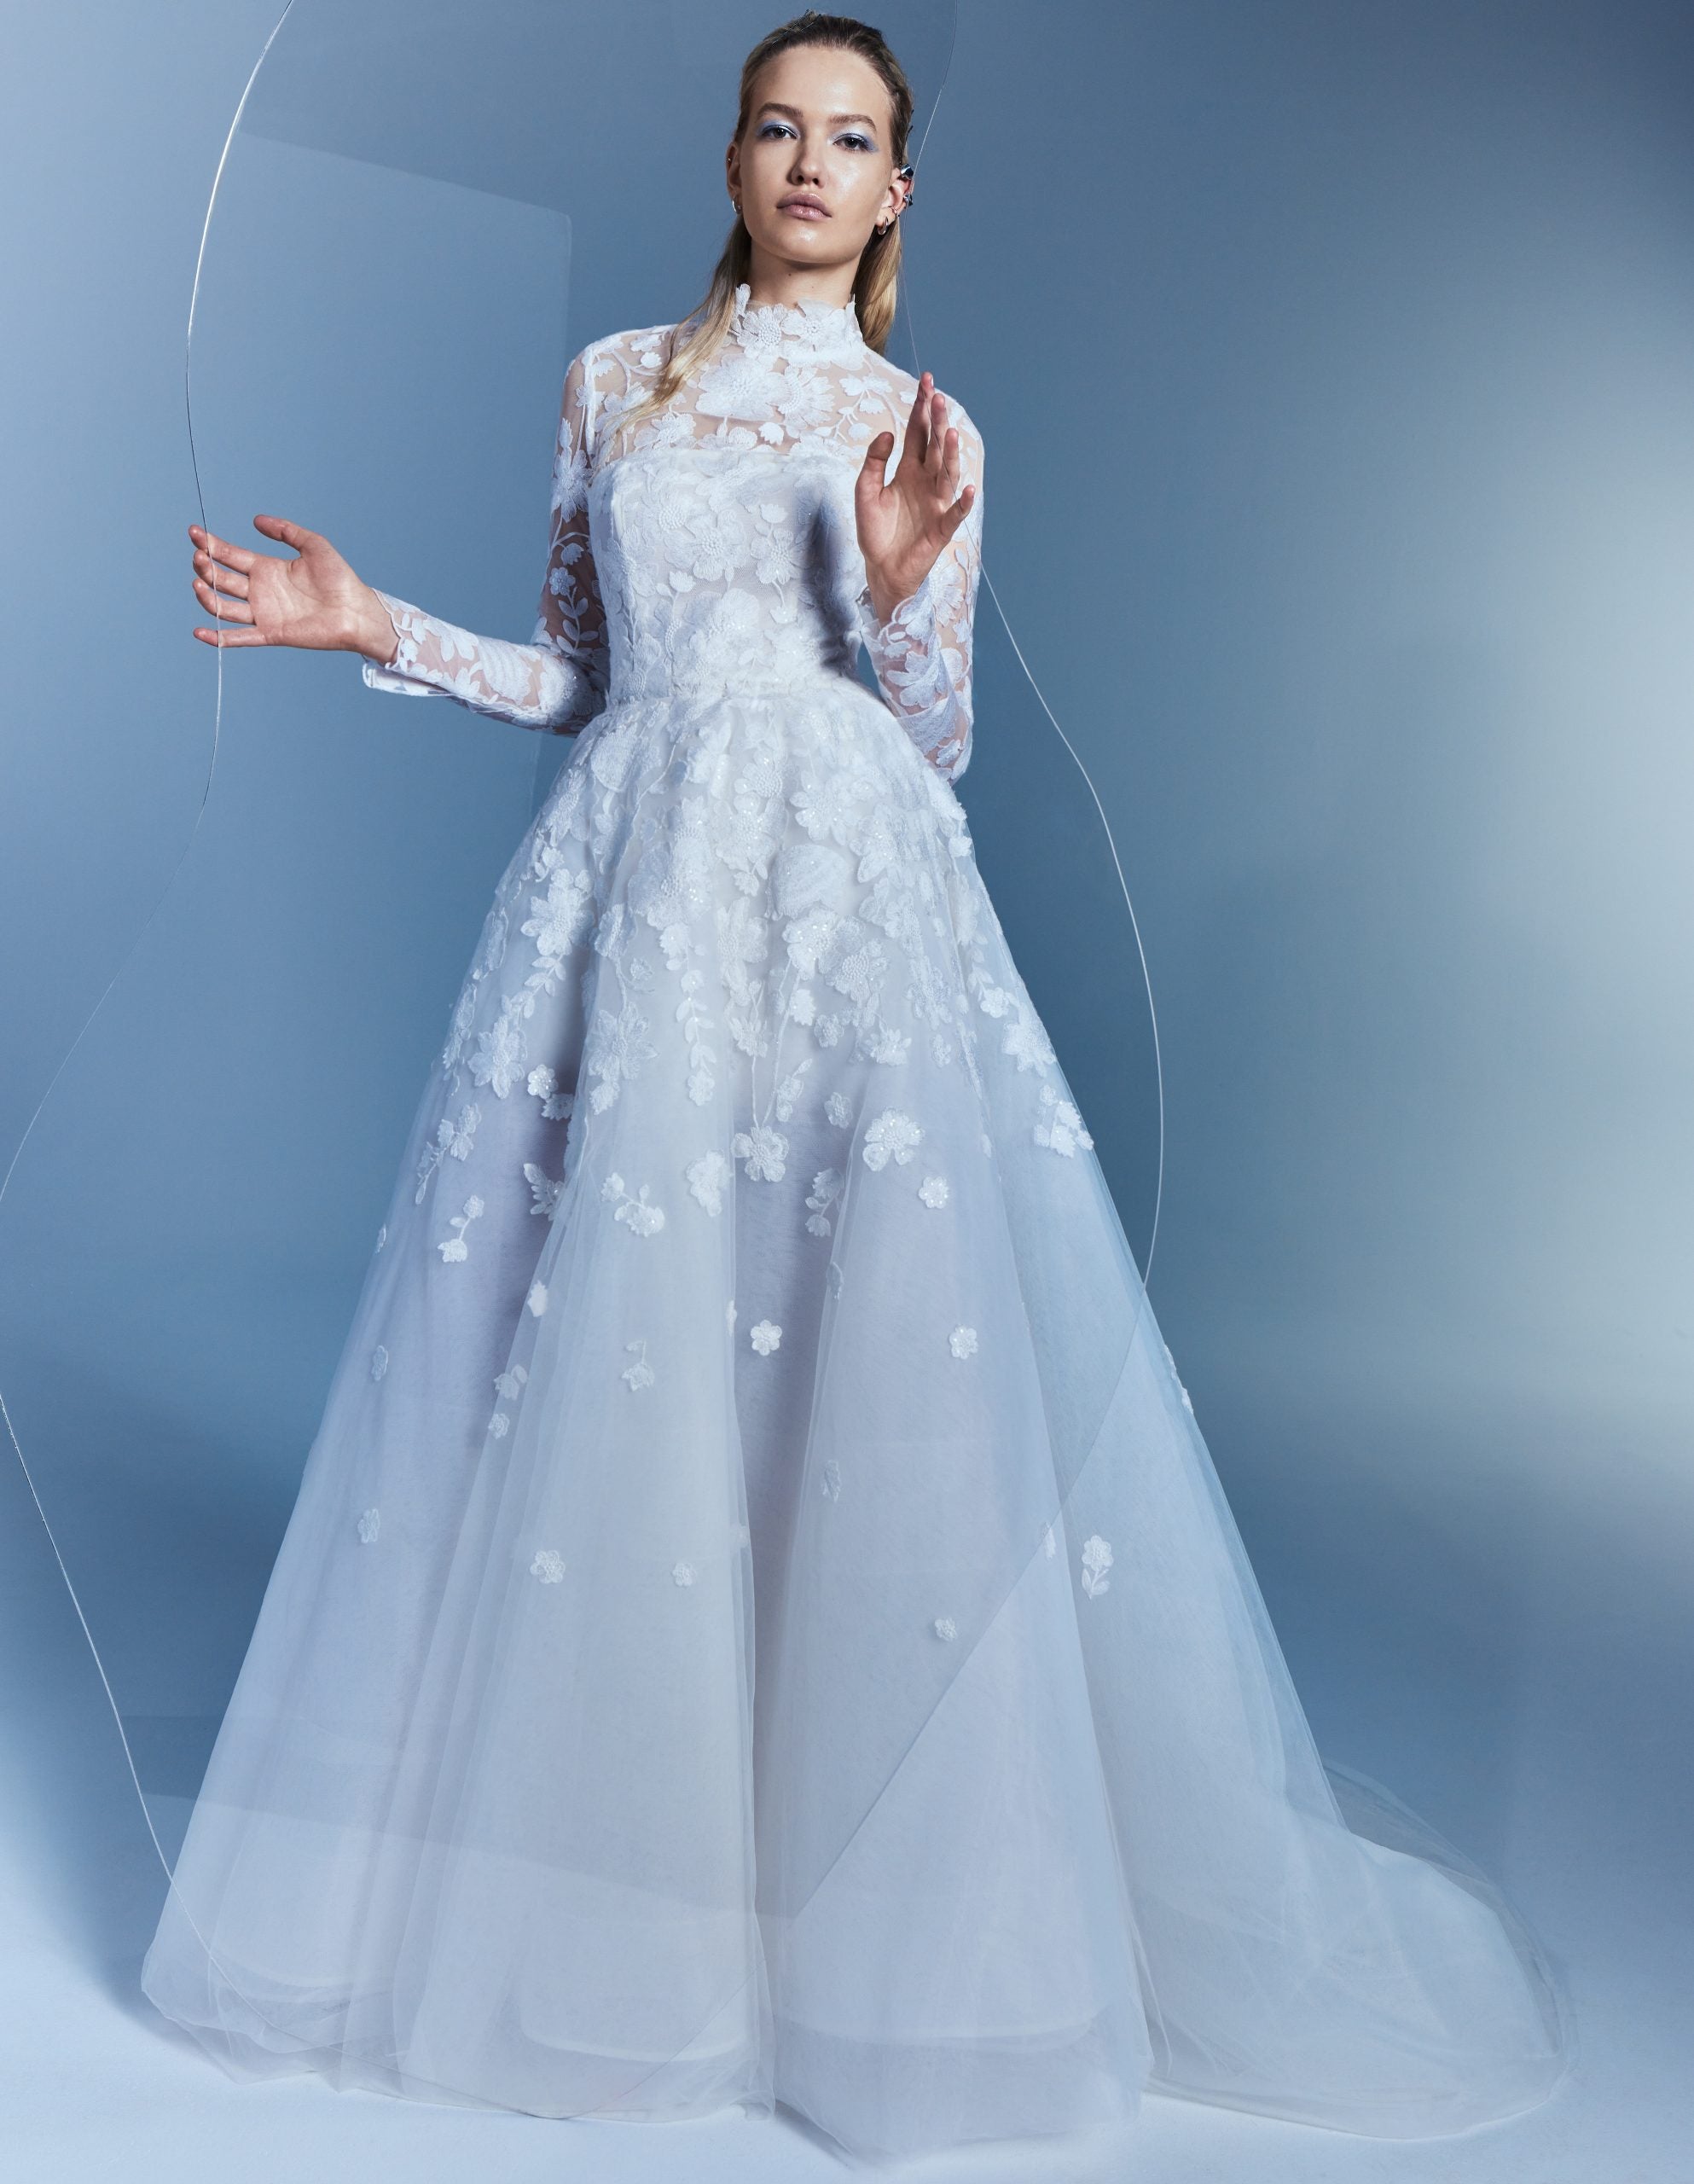 Romantic Convertible High-Necked Long Sleeve Gown by Alyne by Rita Vinieris - Image 1